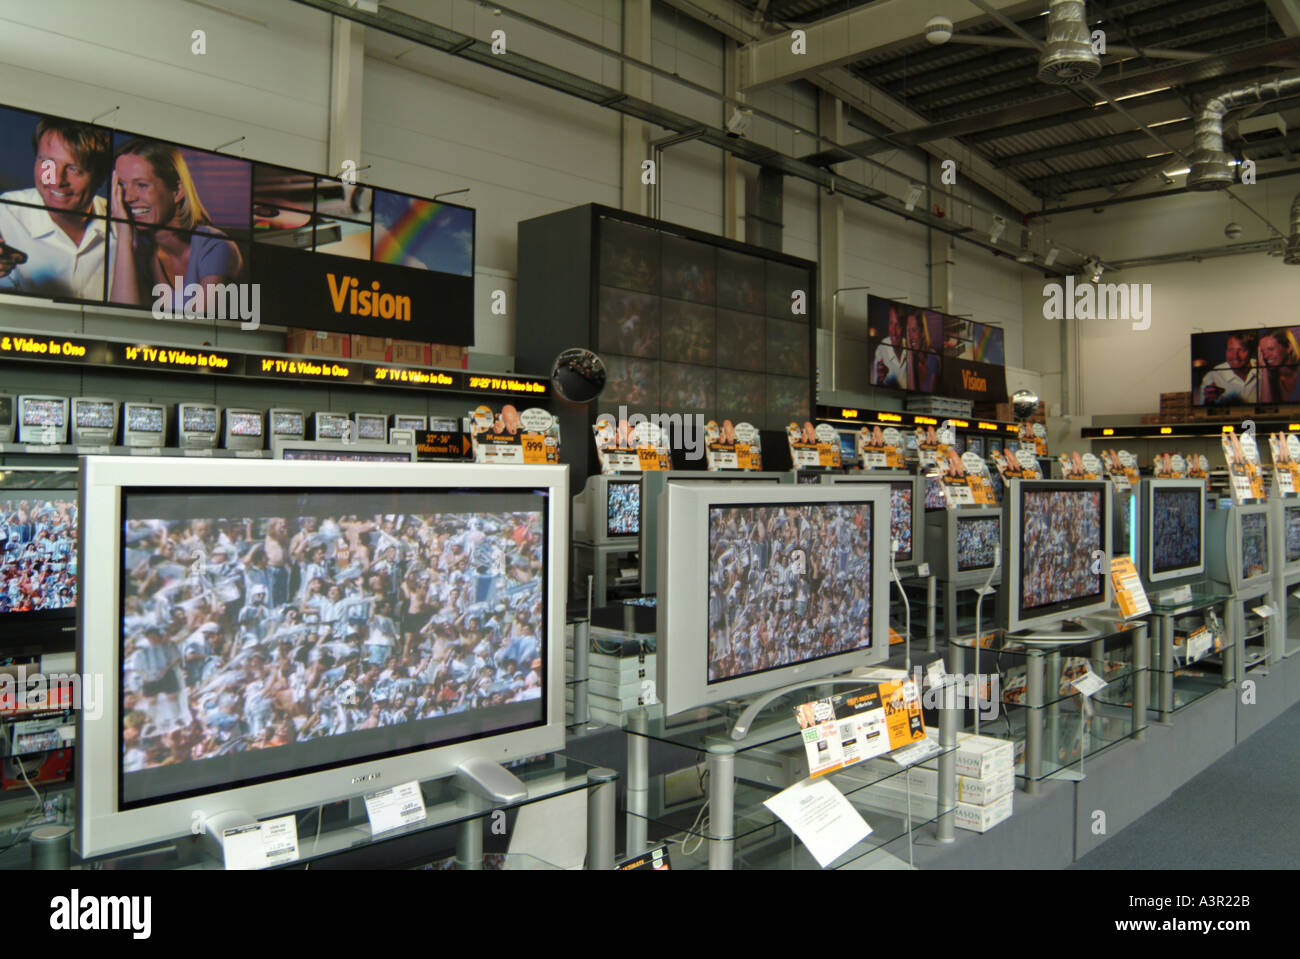 Widescreen Television display in Comet store football onscreen Stock Photo